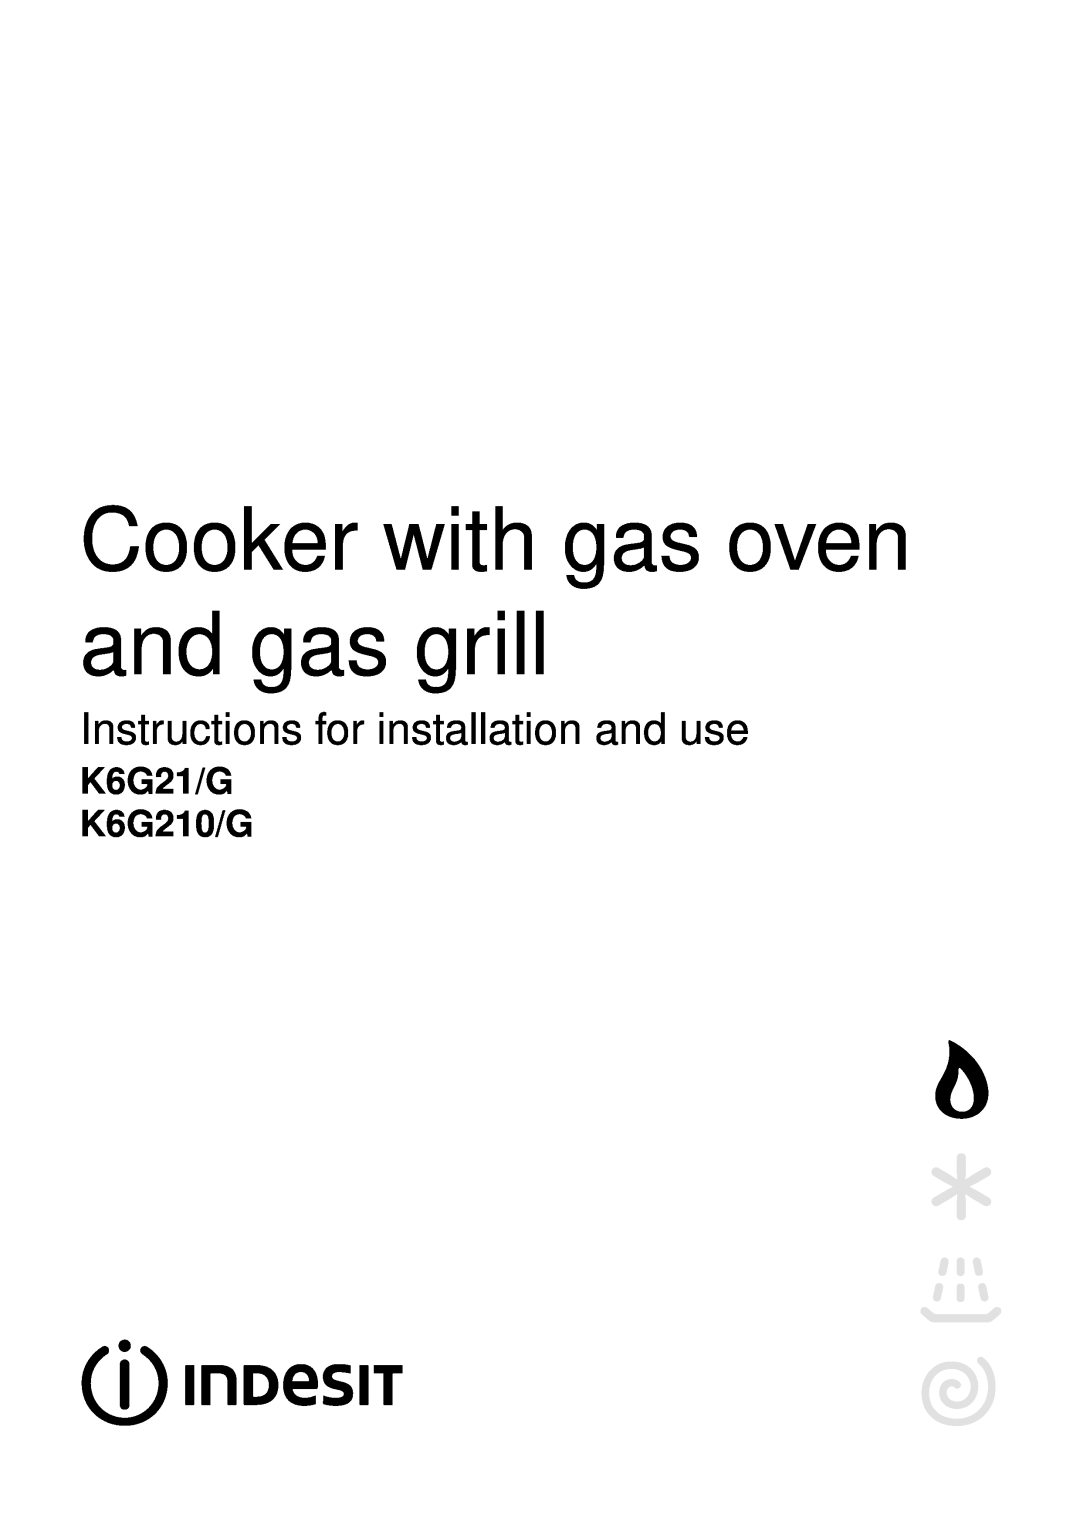 Indesit manual Cooker with gas oven and gas grill, Instructions for installation and use, K6G21/G K6G210/G 